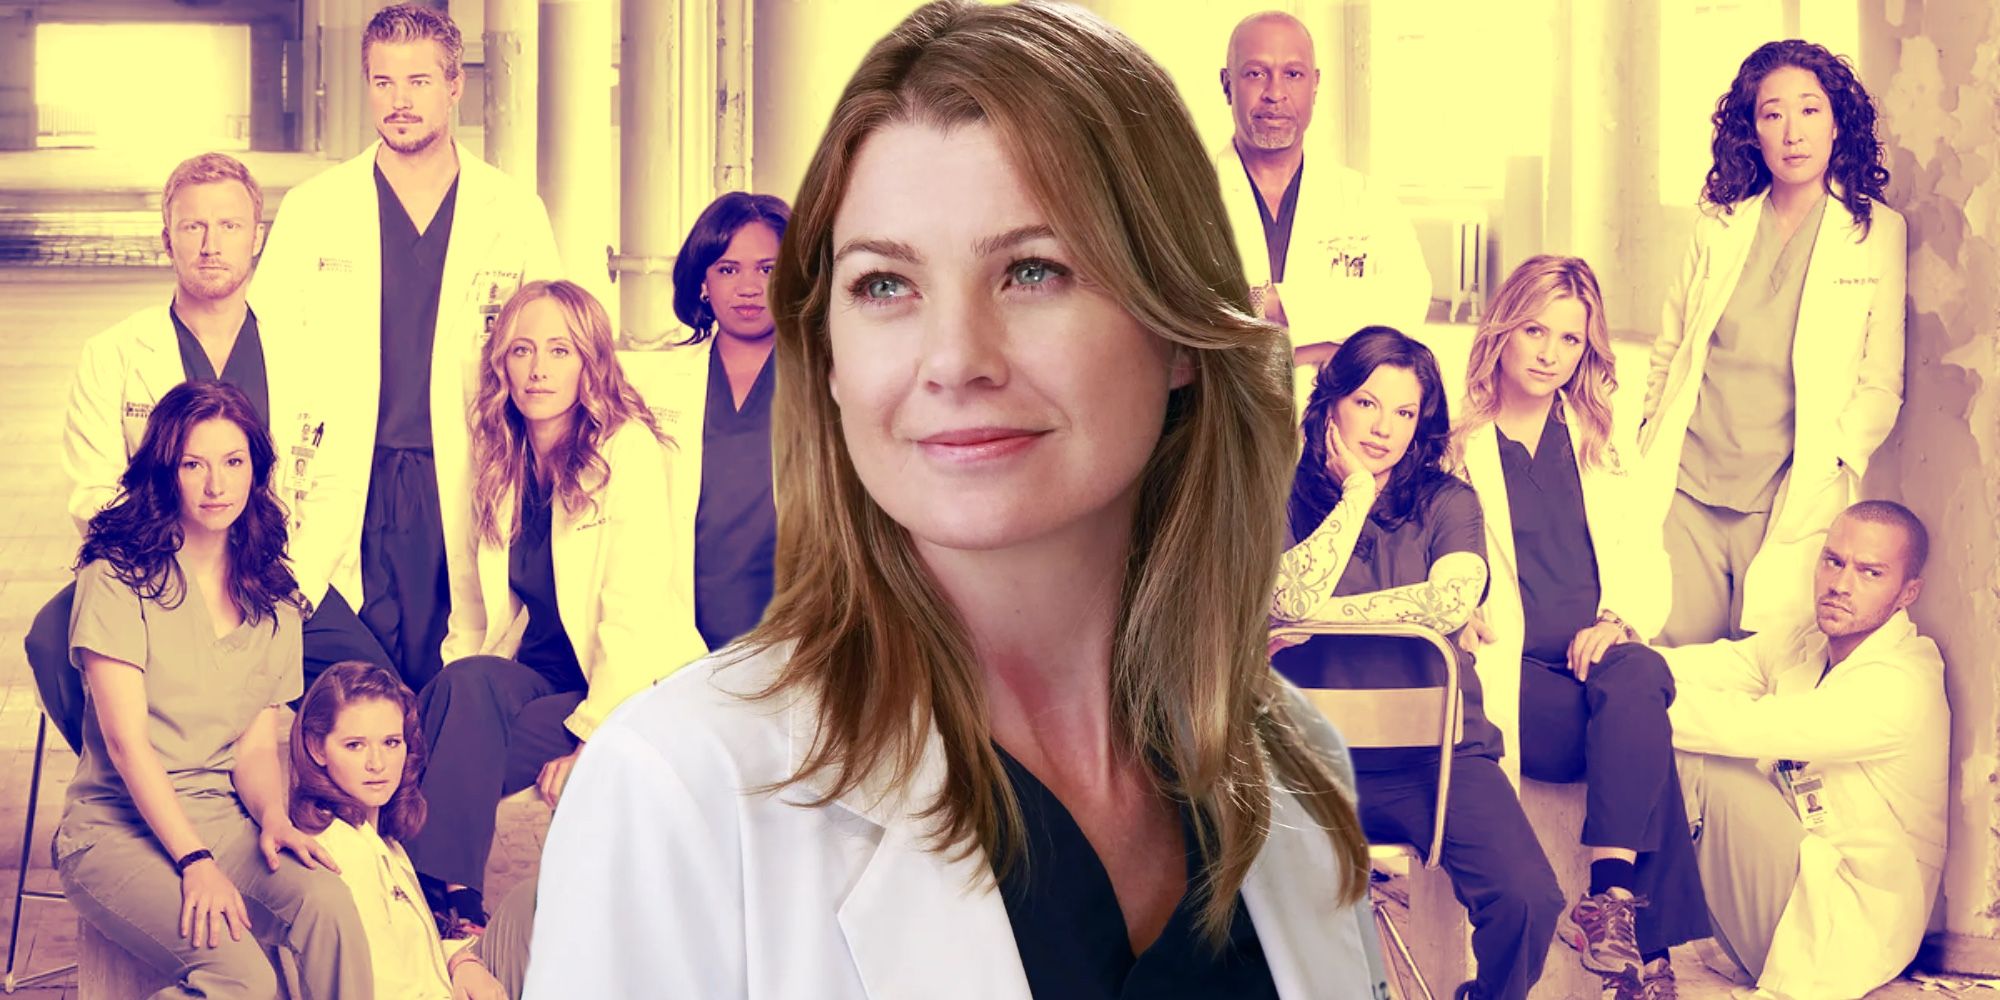 A composite image of Meredith Grey and the cast of Grey's Anatomy